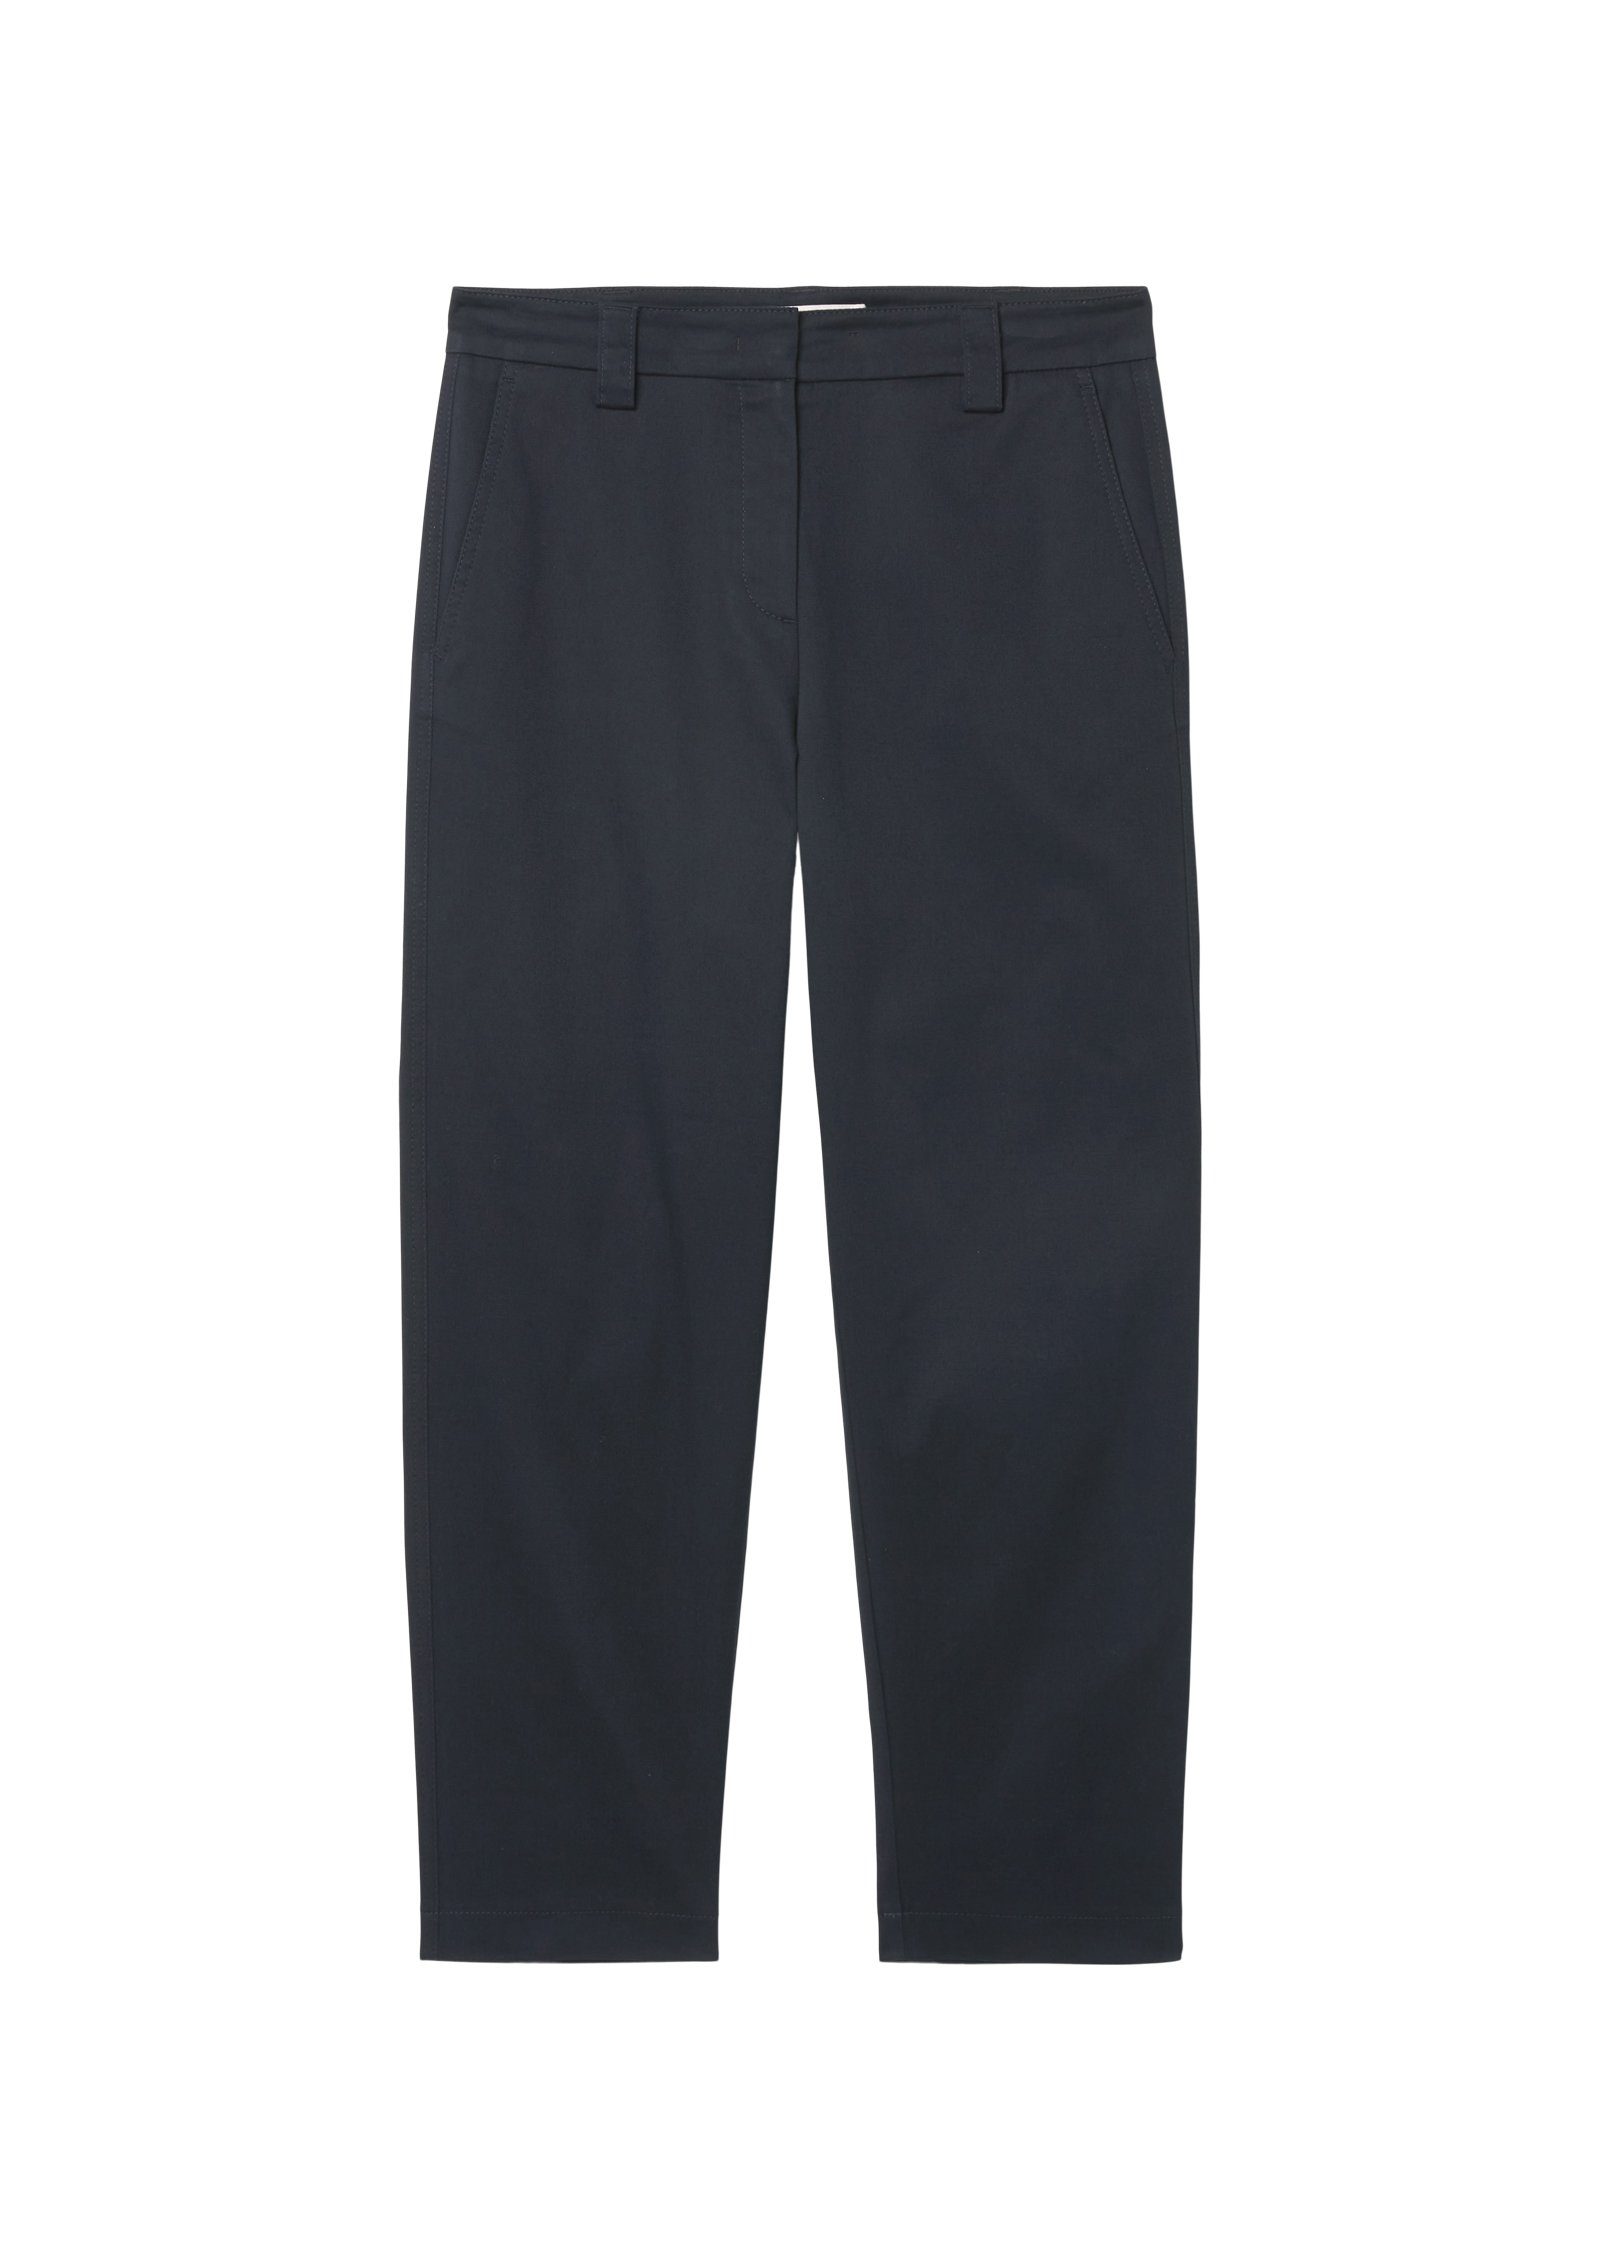 Marc O'Polo 7/8-Hose Pants, modern style, modernen blue Chino-Style im leg, rise, chino welt pocket tapered high thunder